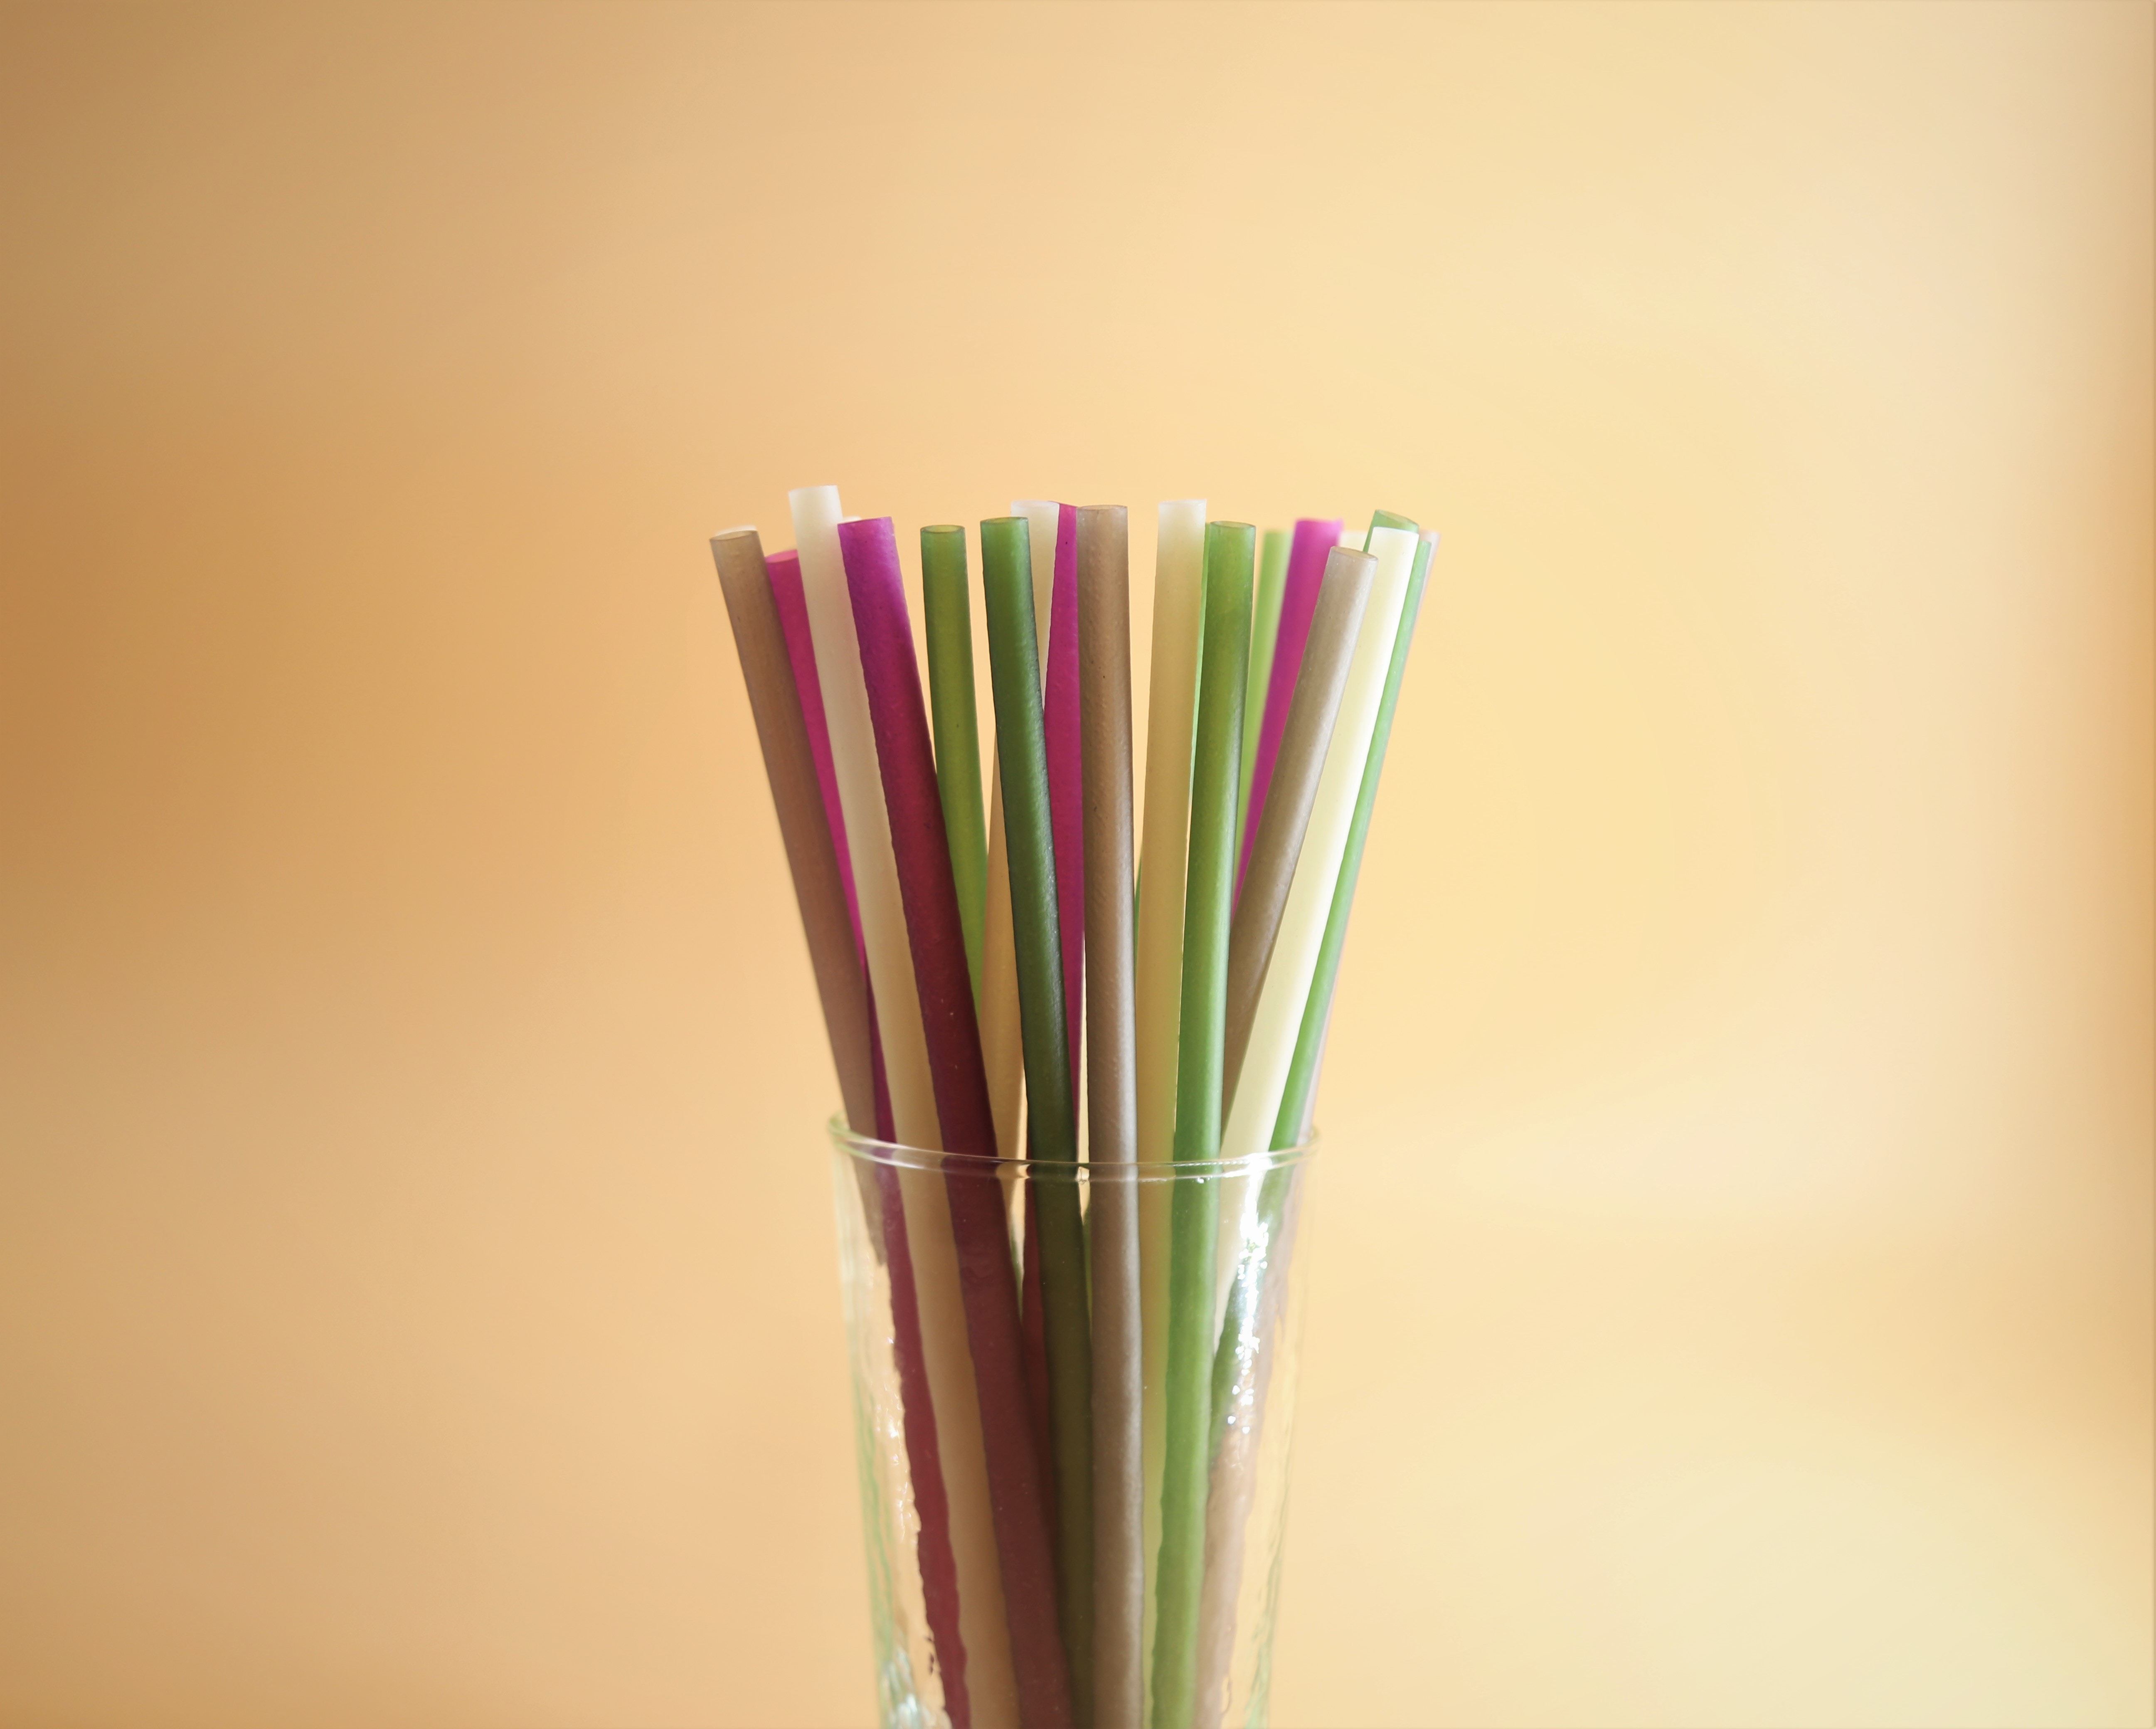 Colorful straws in a cup with a light yellow background